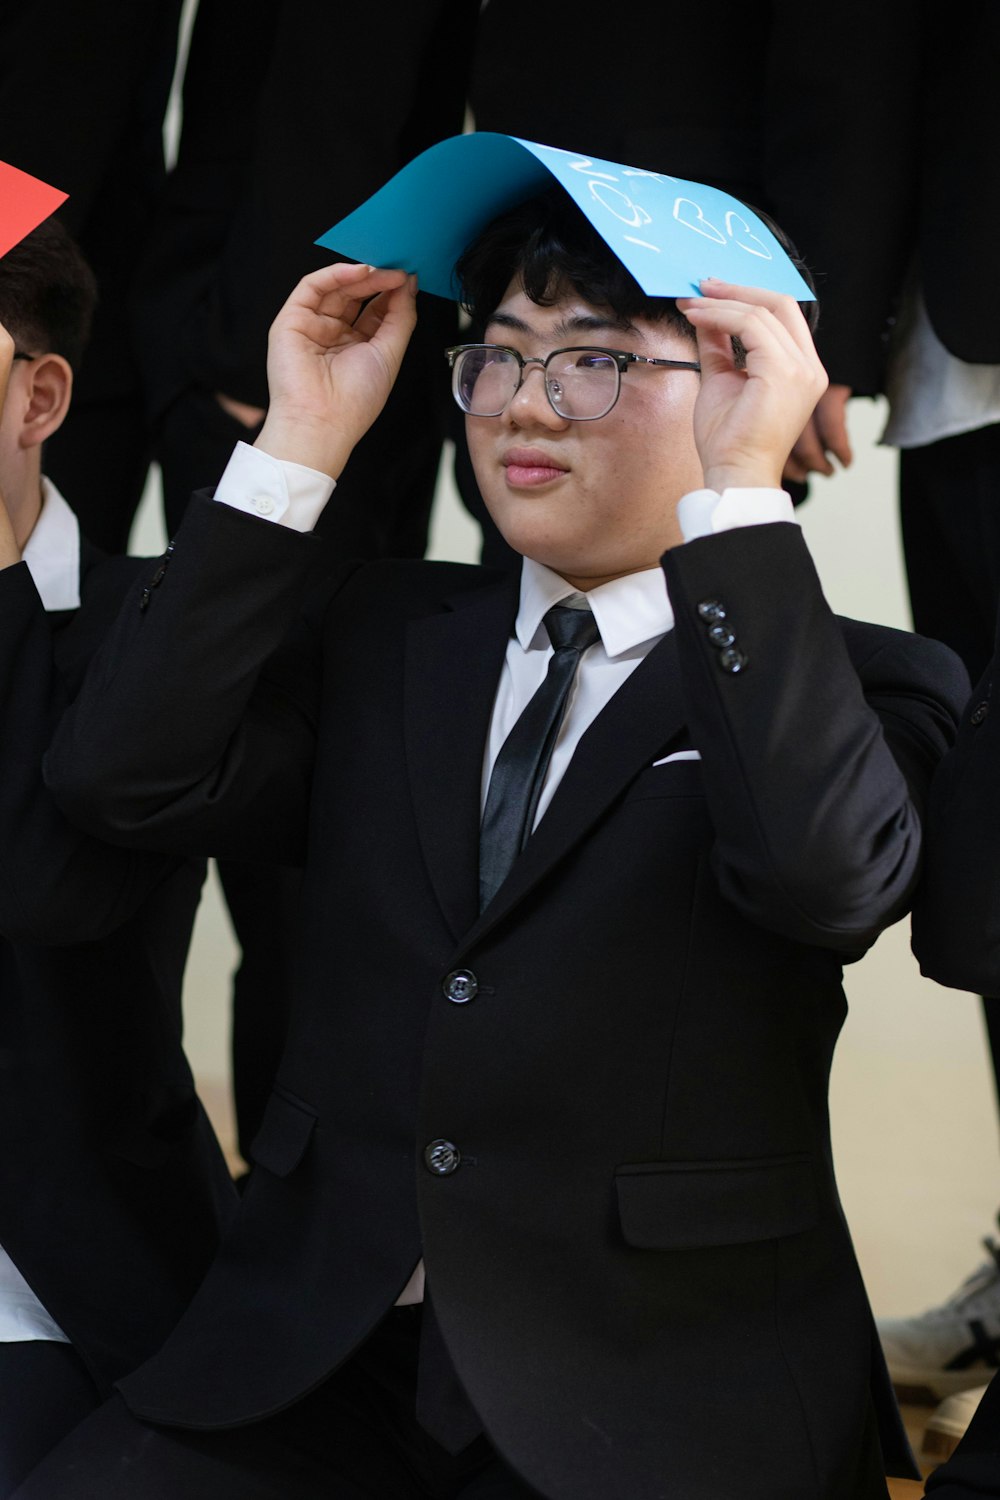 a man in a suit and tie holding a paper hat over his head